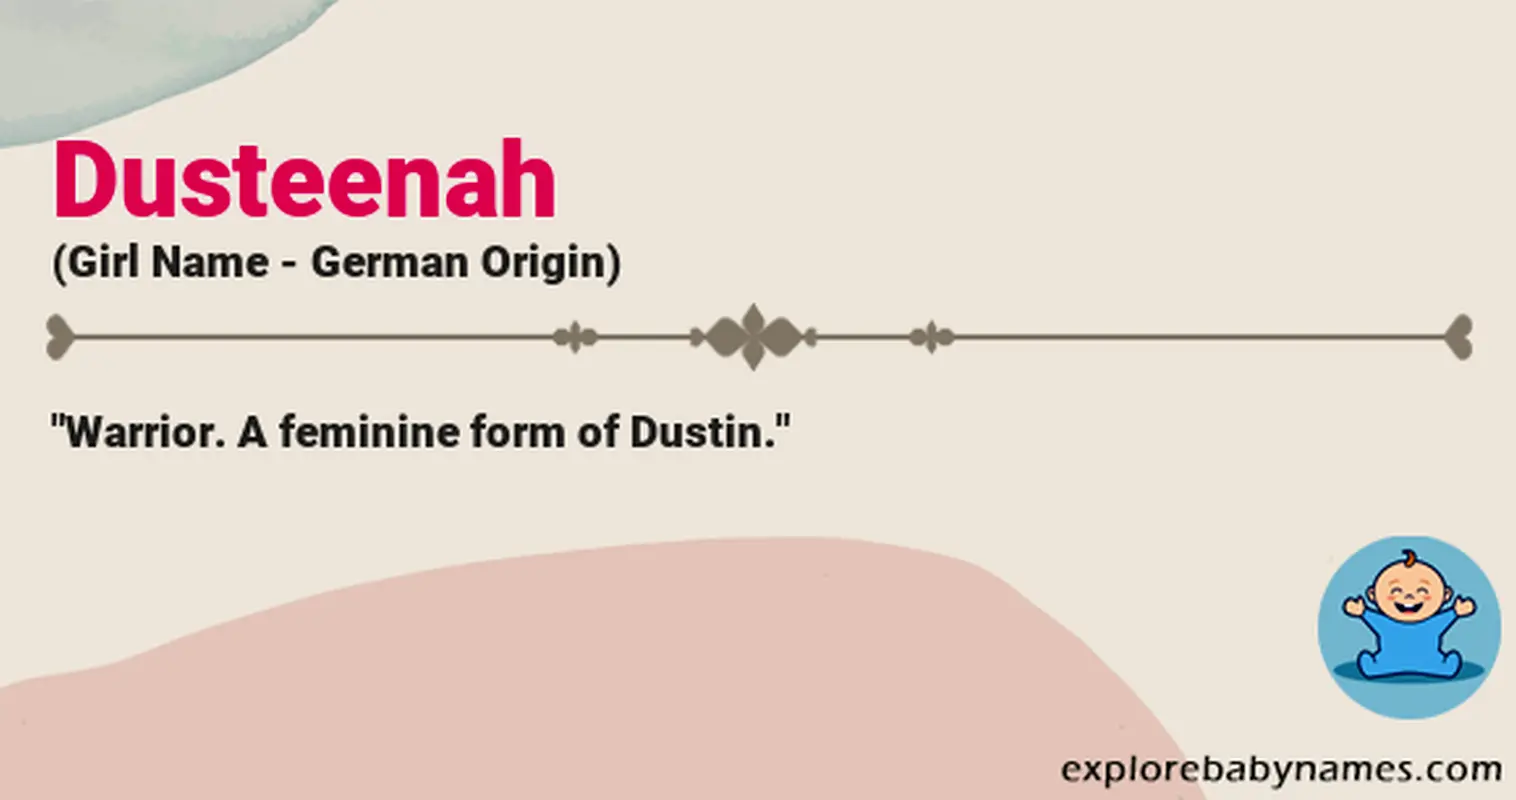 Meaning of Dusteenah